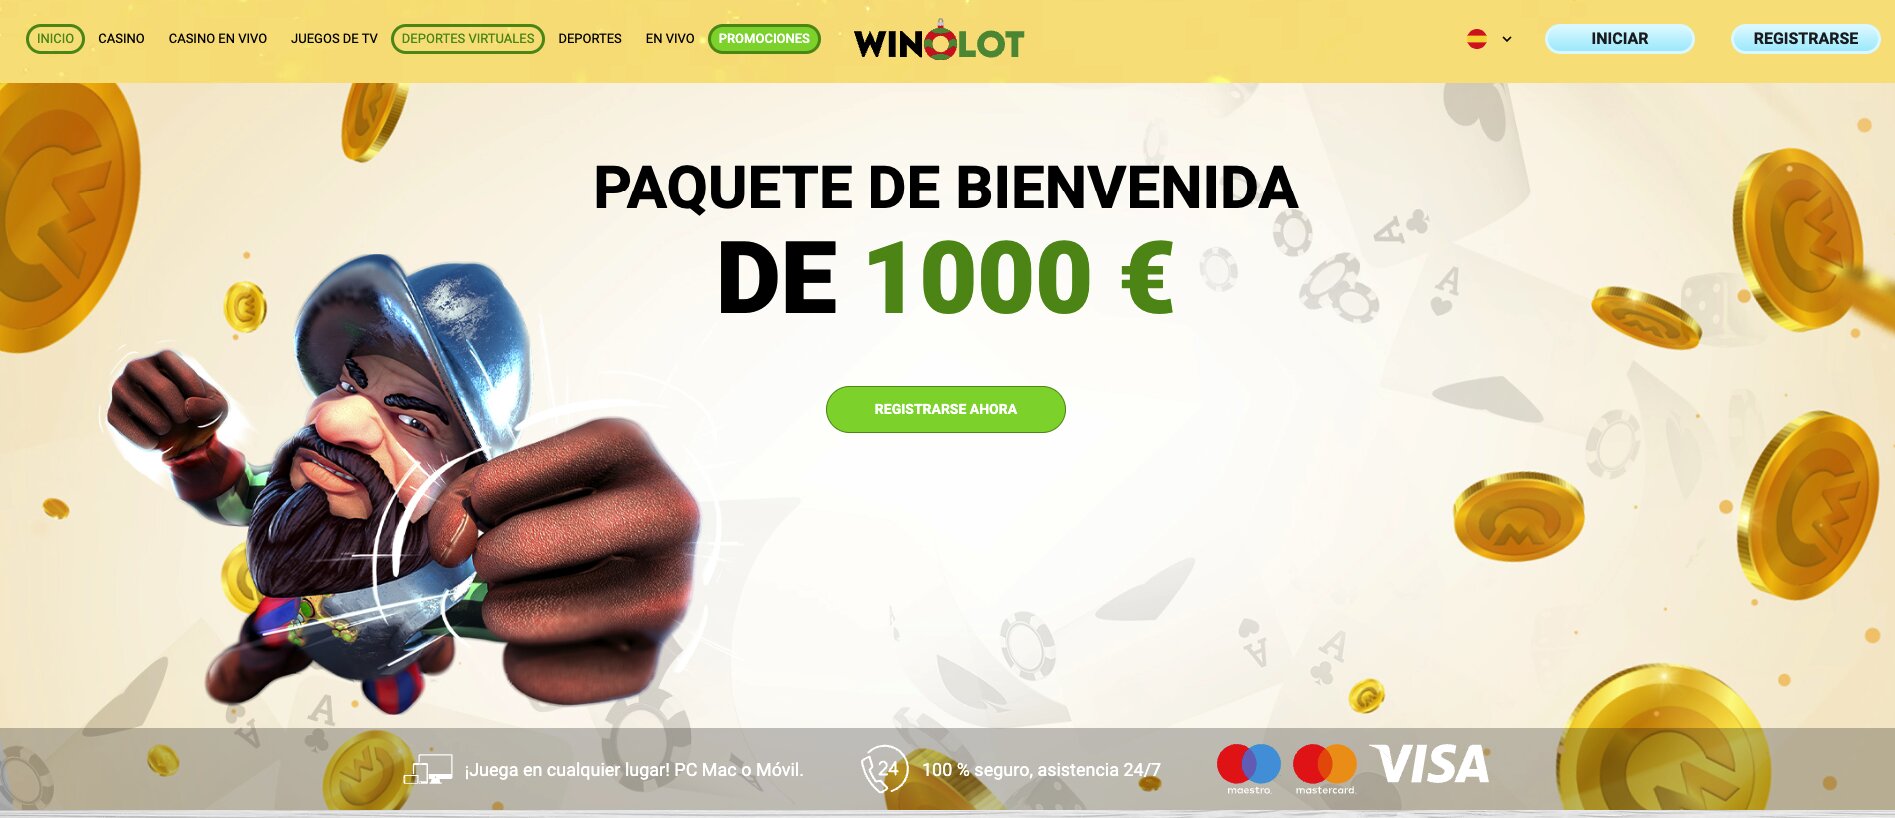 winolot welcome